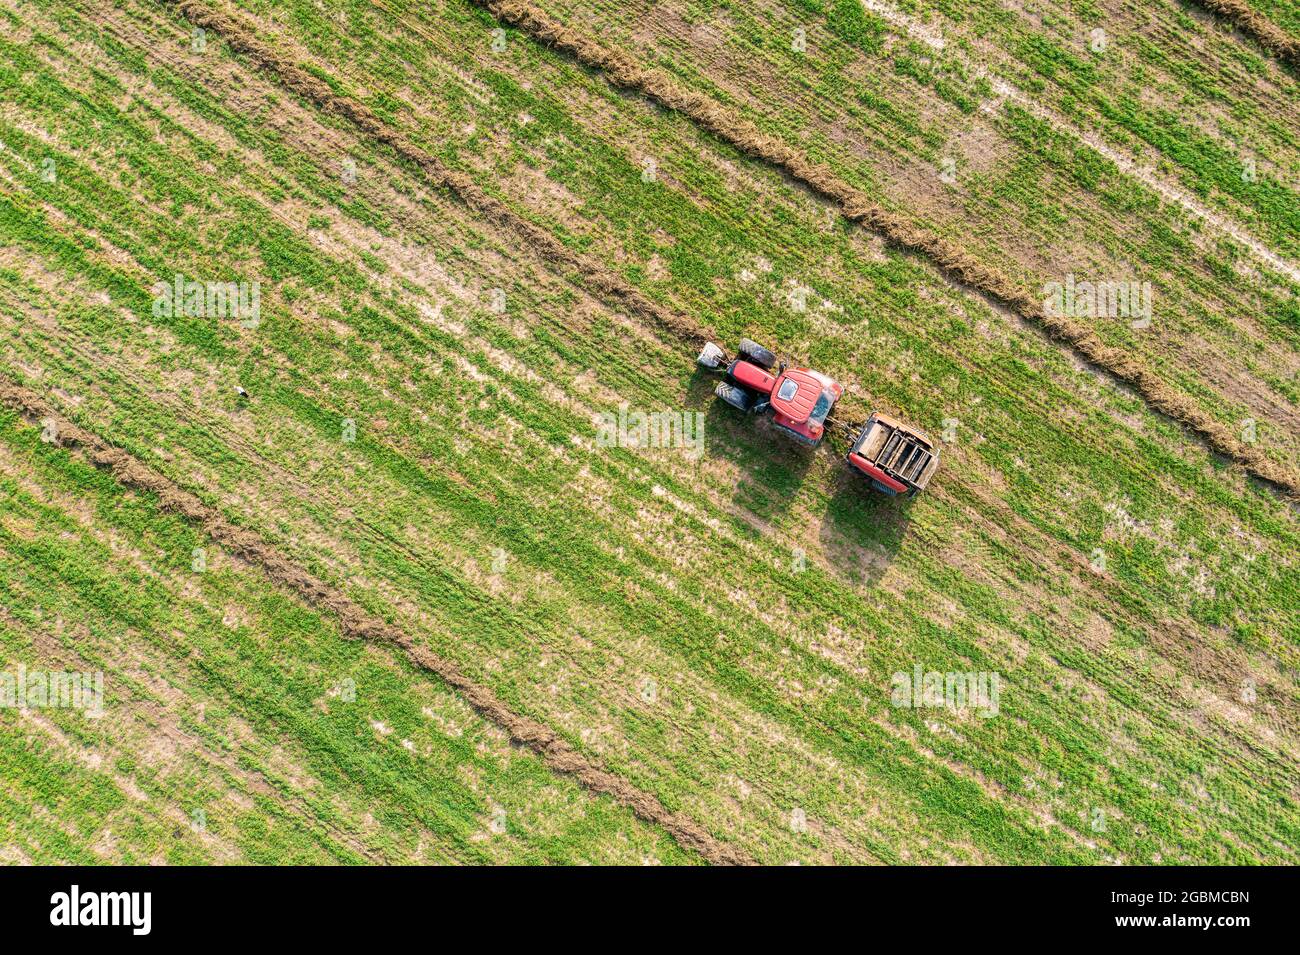 Round baler at work, making straw bales from dry grass, aerial view of agricultural machinery at work Stock Photo